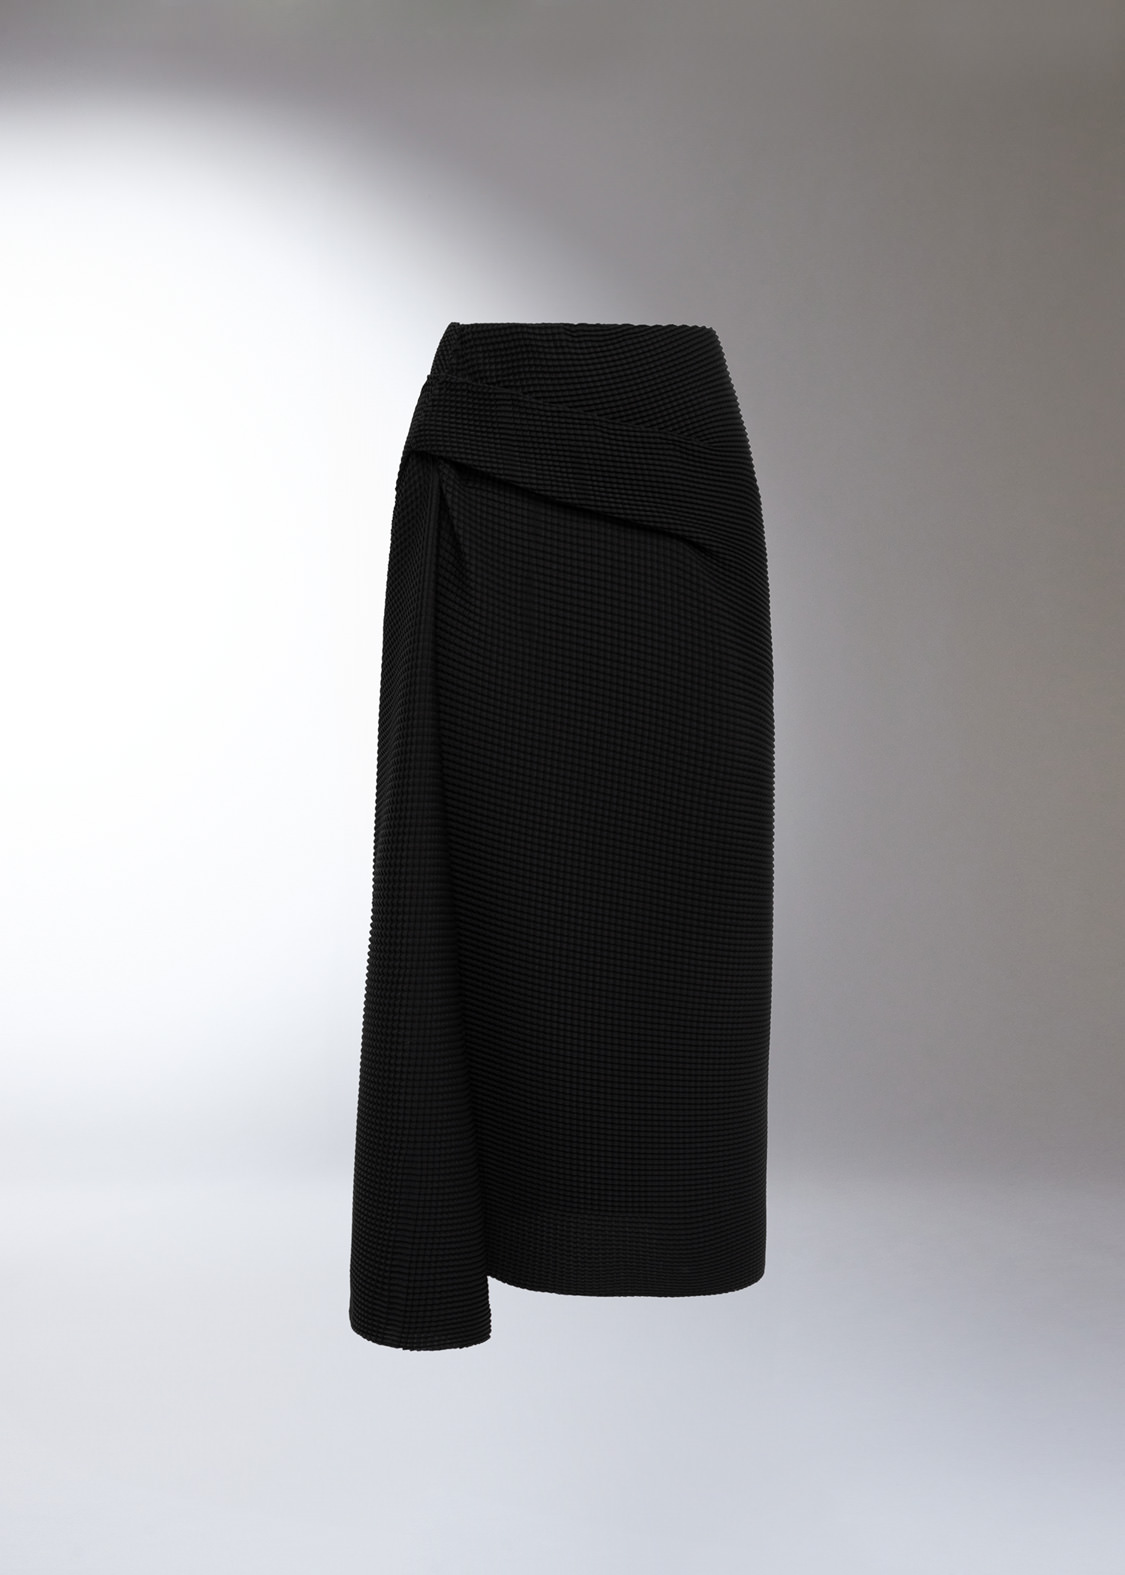 DEL CORE: PLEATED PECIL SKIRT